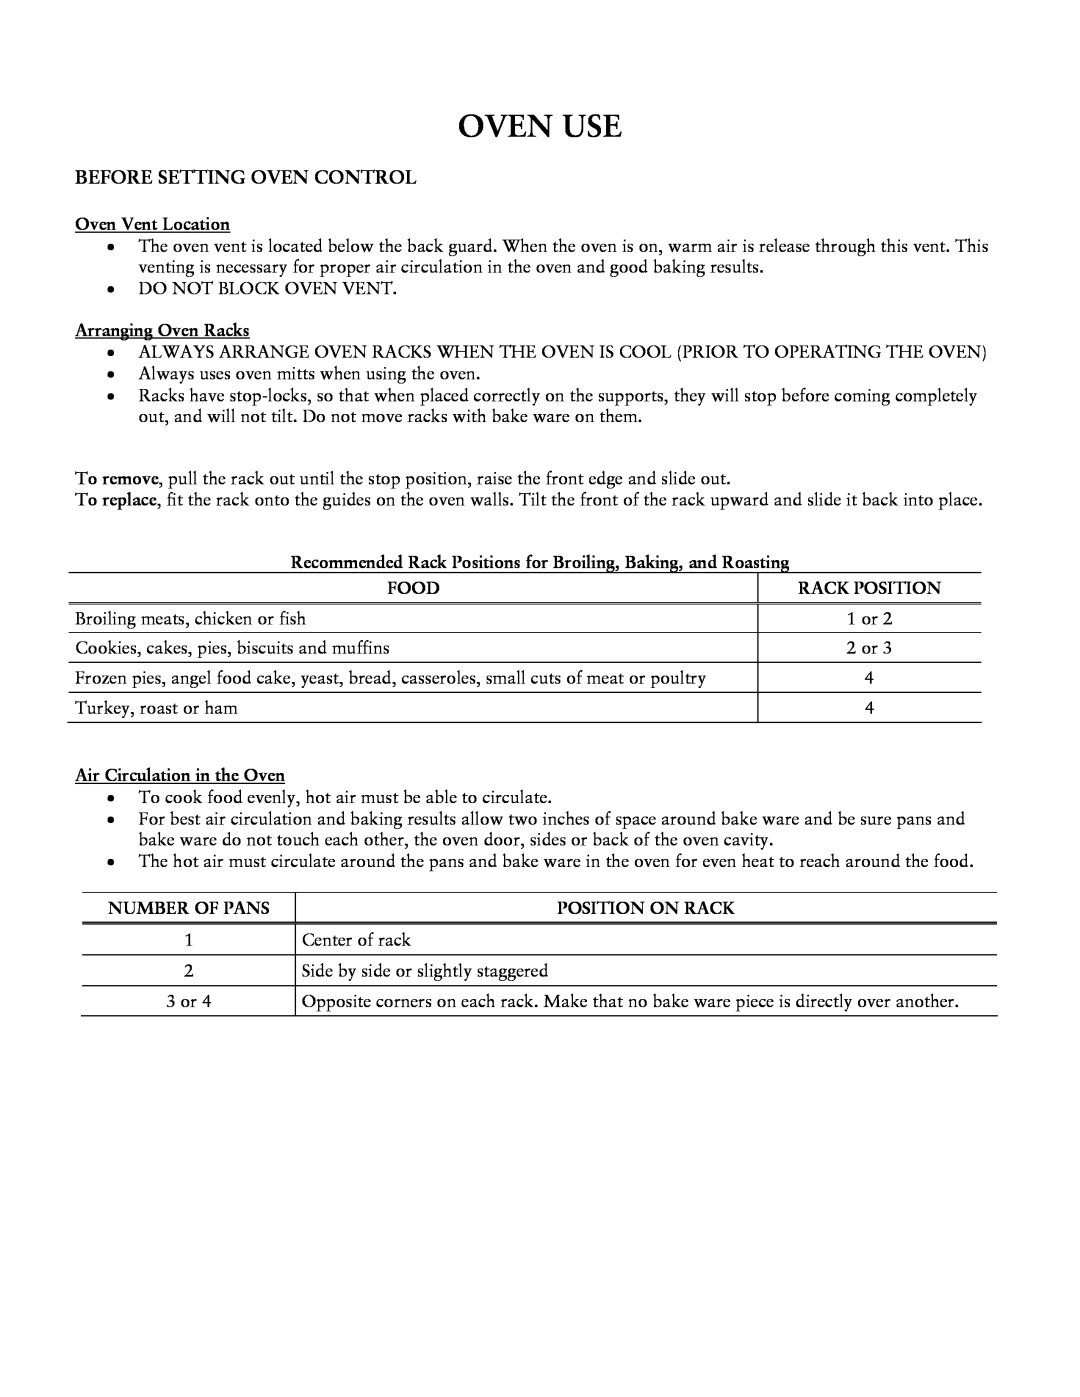 Jarden consumer Solutions Jarden consumer Solutions user manual Oven Use, Before Setting Oven Control 